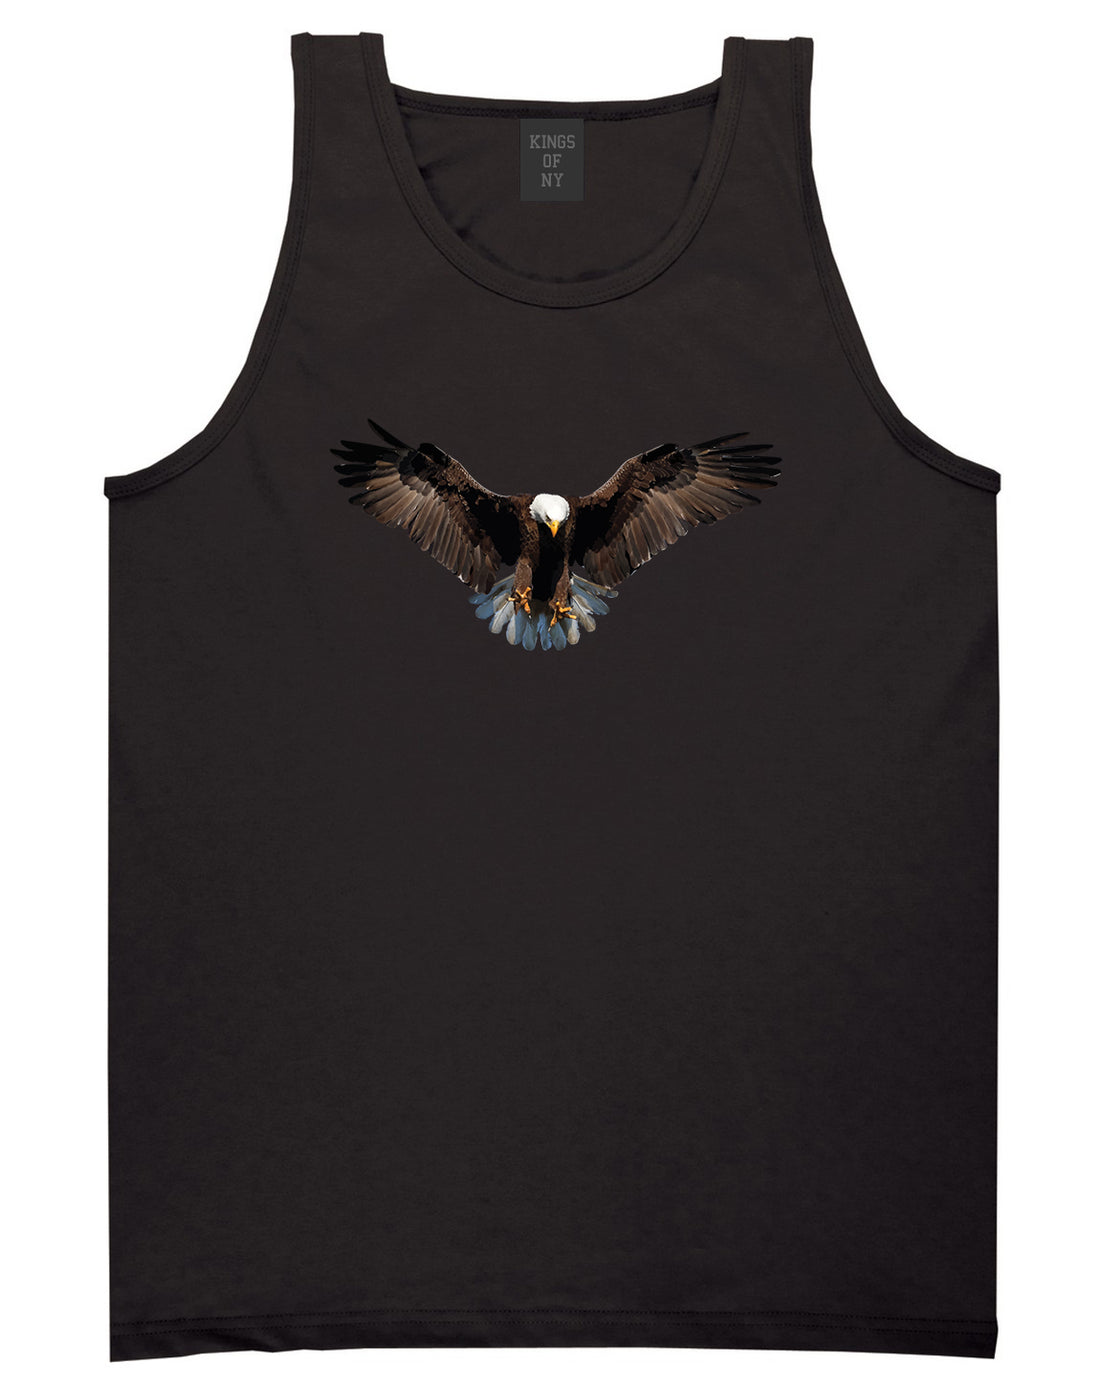 Bald Eagle Wings Spread Black Tank Top Shirt by Kings Of NY